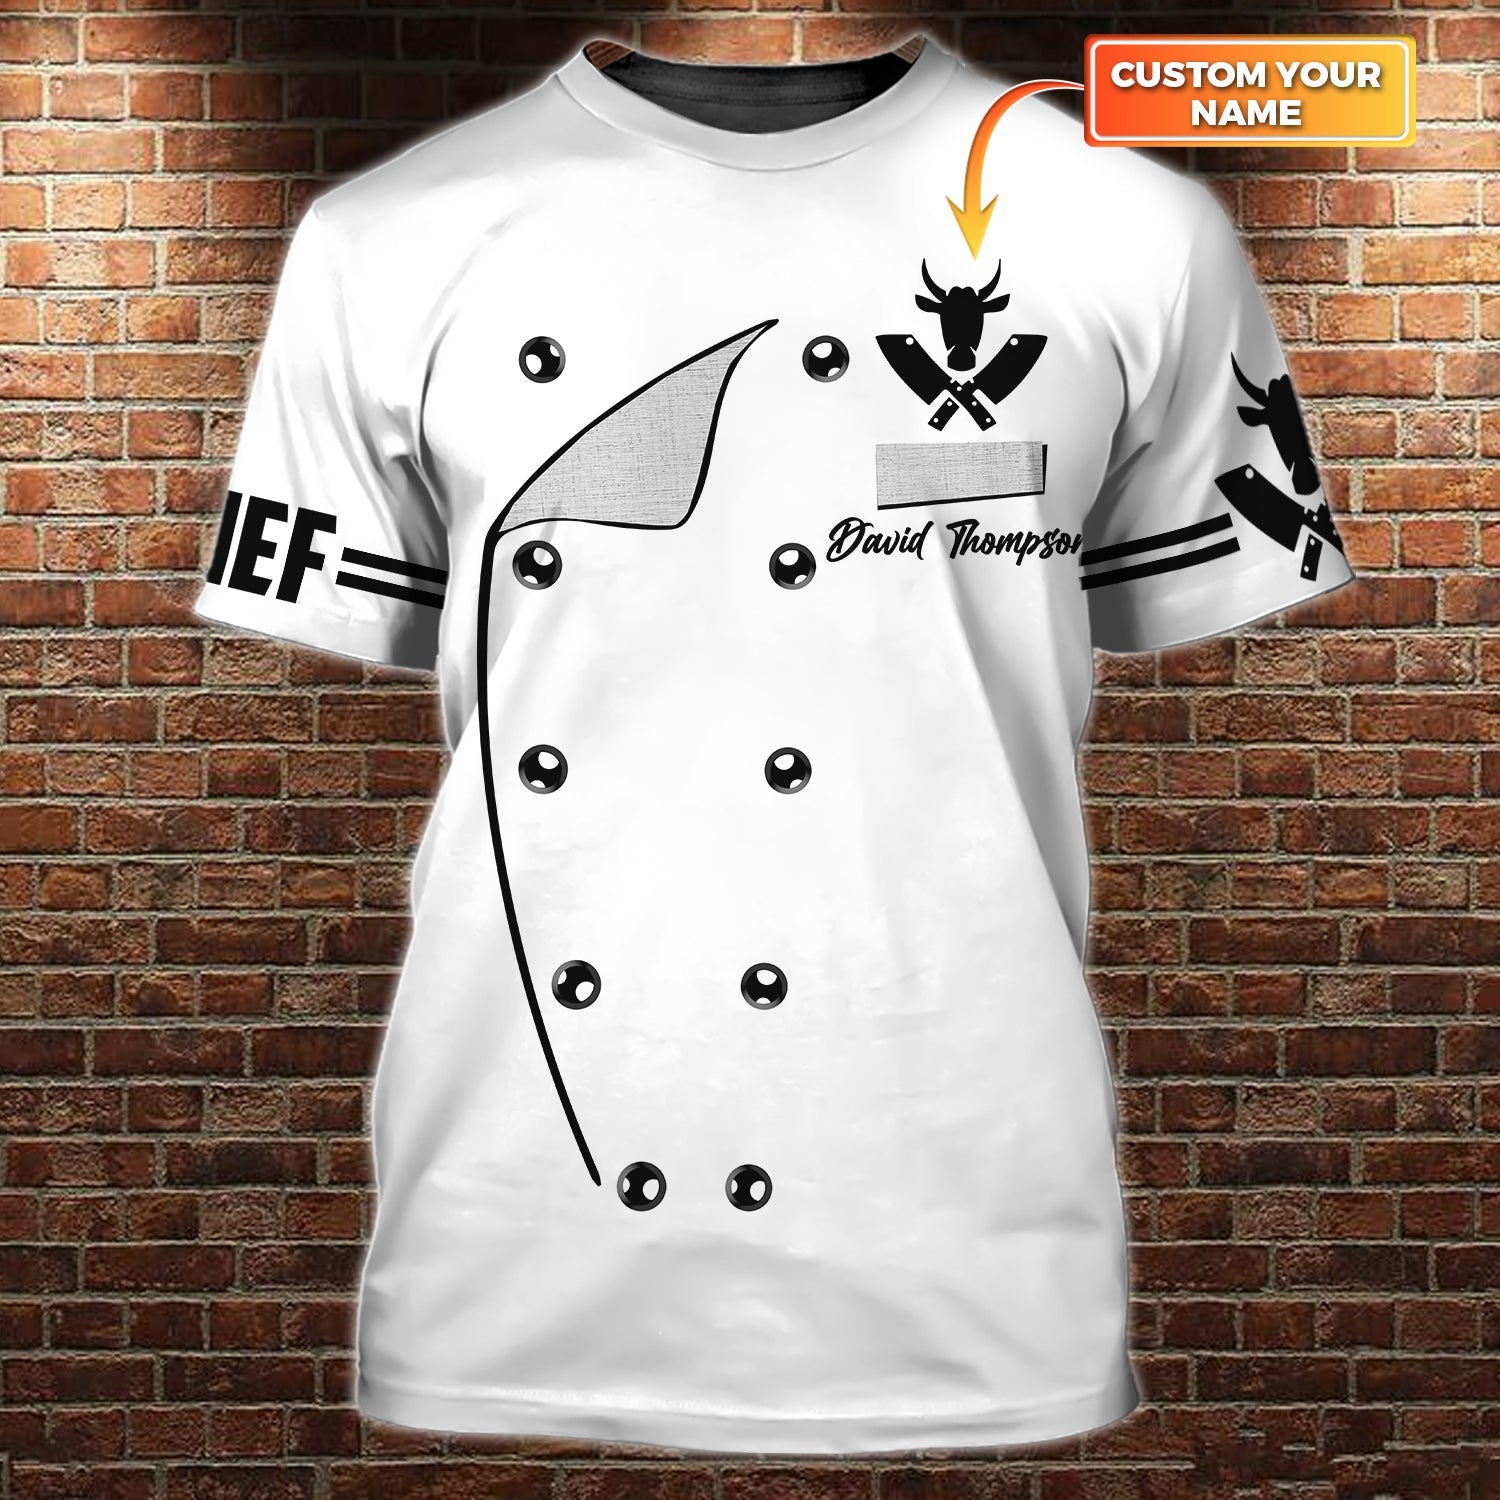 3D CHEF 79 - Personalized Name 3D Tshirt 01 - HTA- HKM